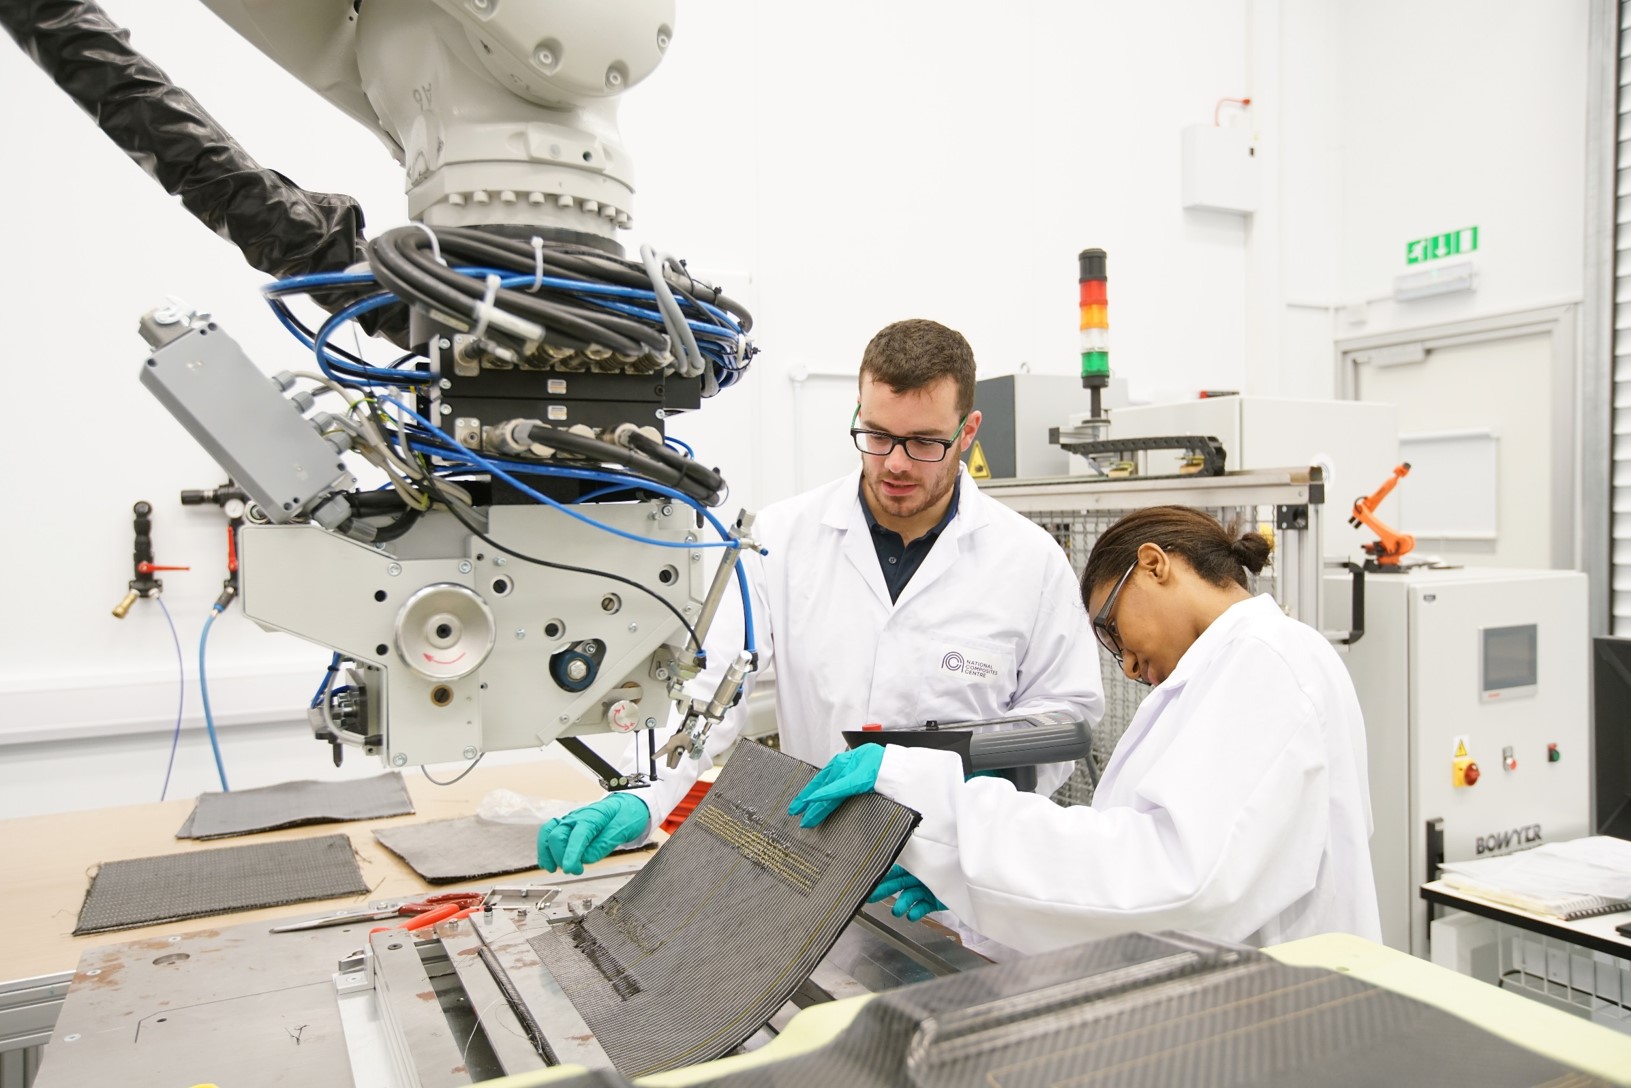 Scientists at the National Composites Centre